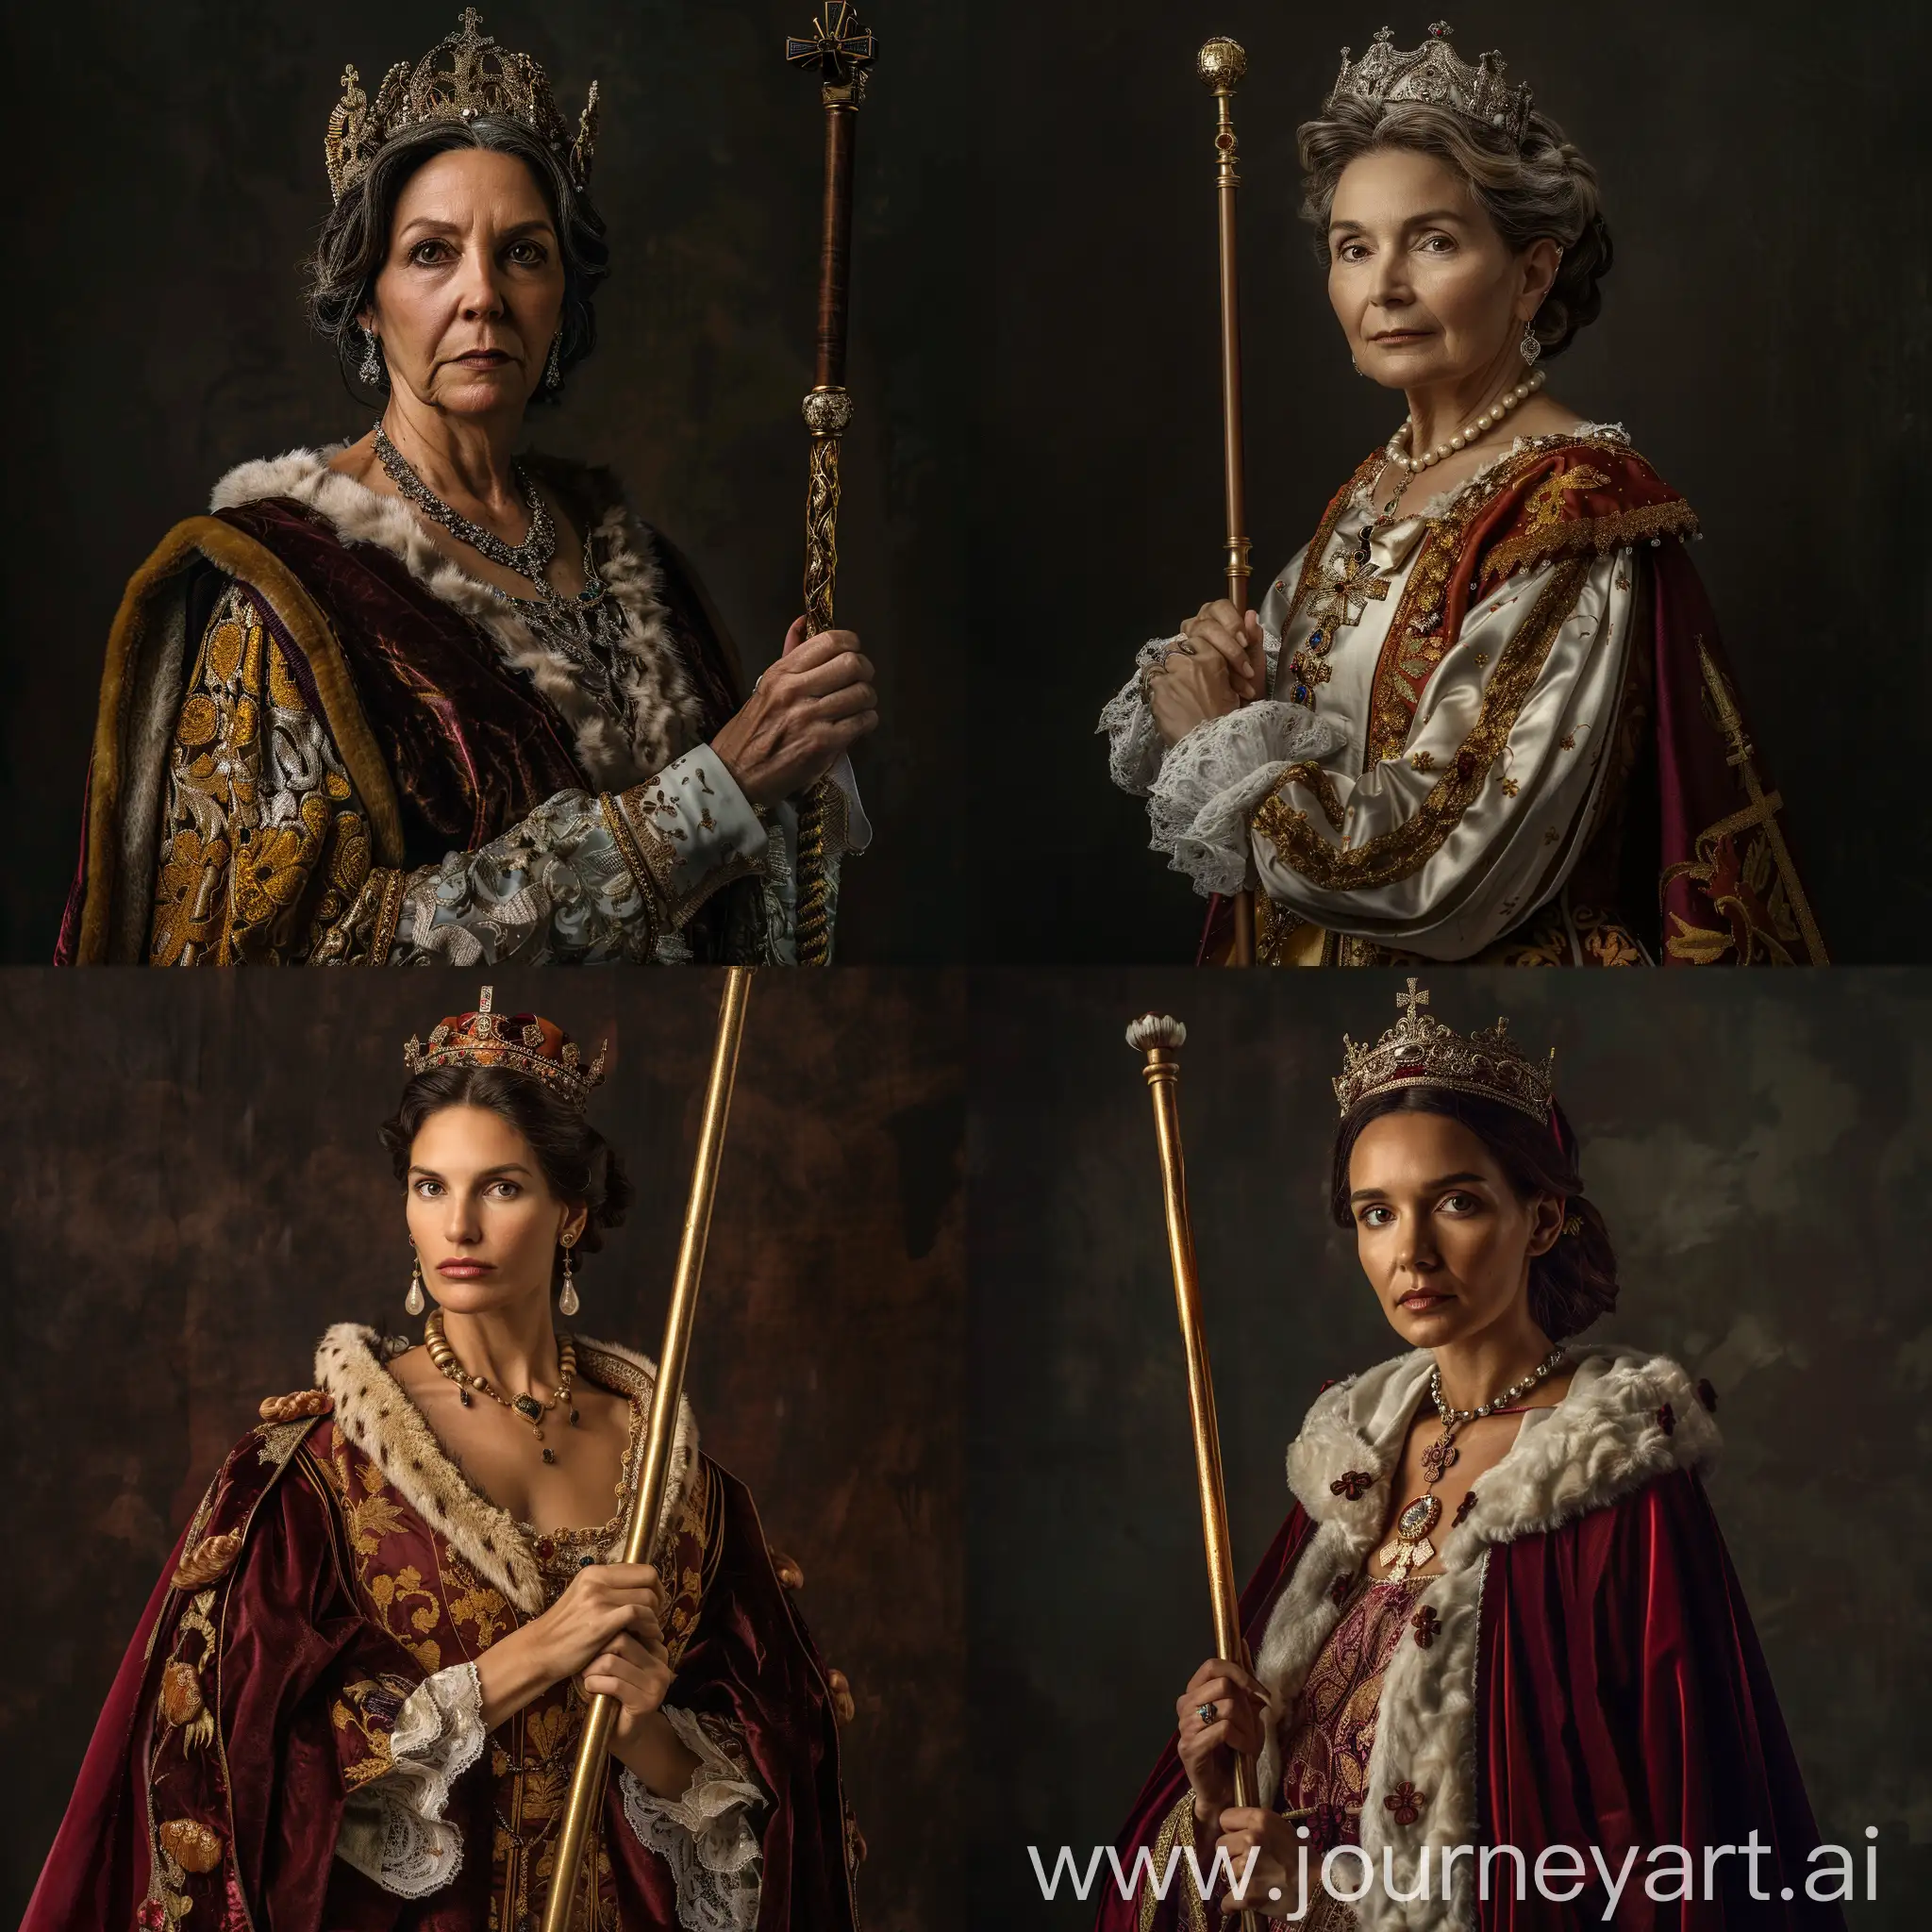 Queen Isabella of Castile, mature, 40 years old, in Catholic Queen attire, royal, she has a noble rod in her hand, posing, cinematic lighting, realistic image